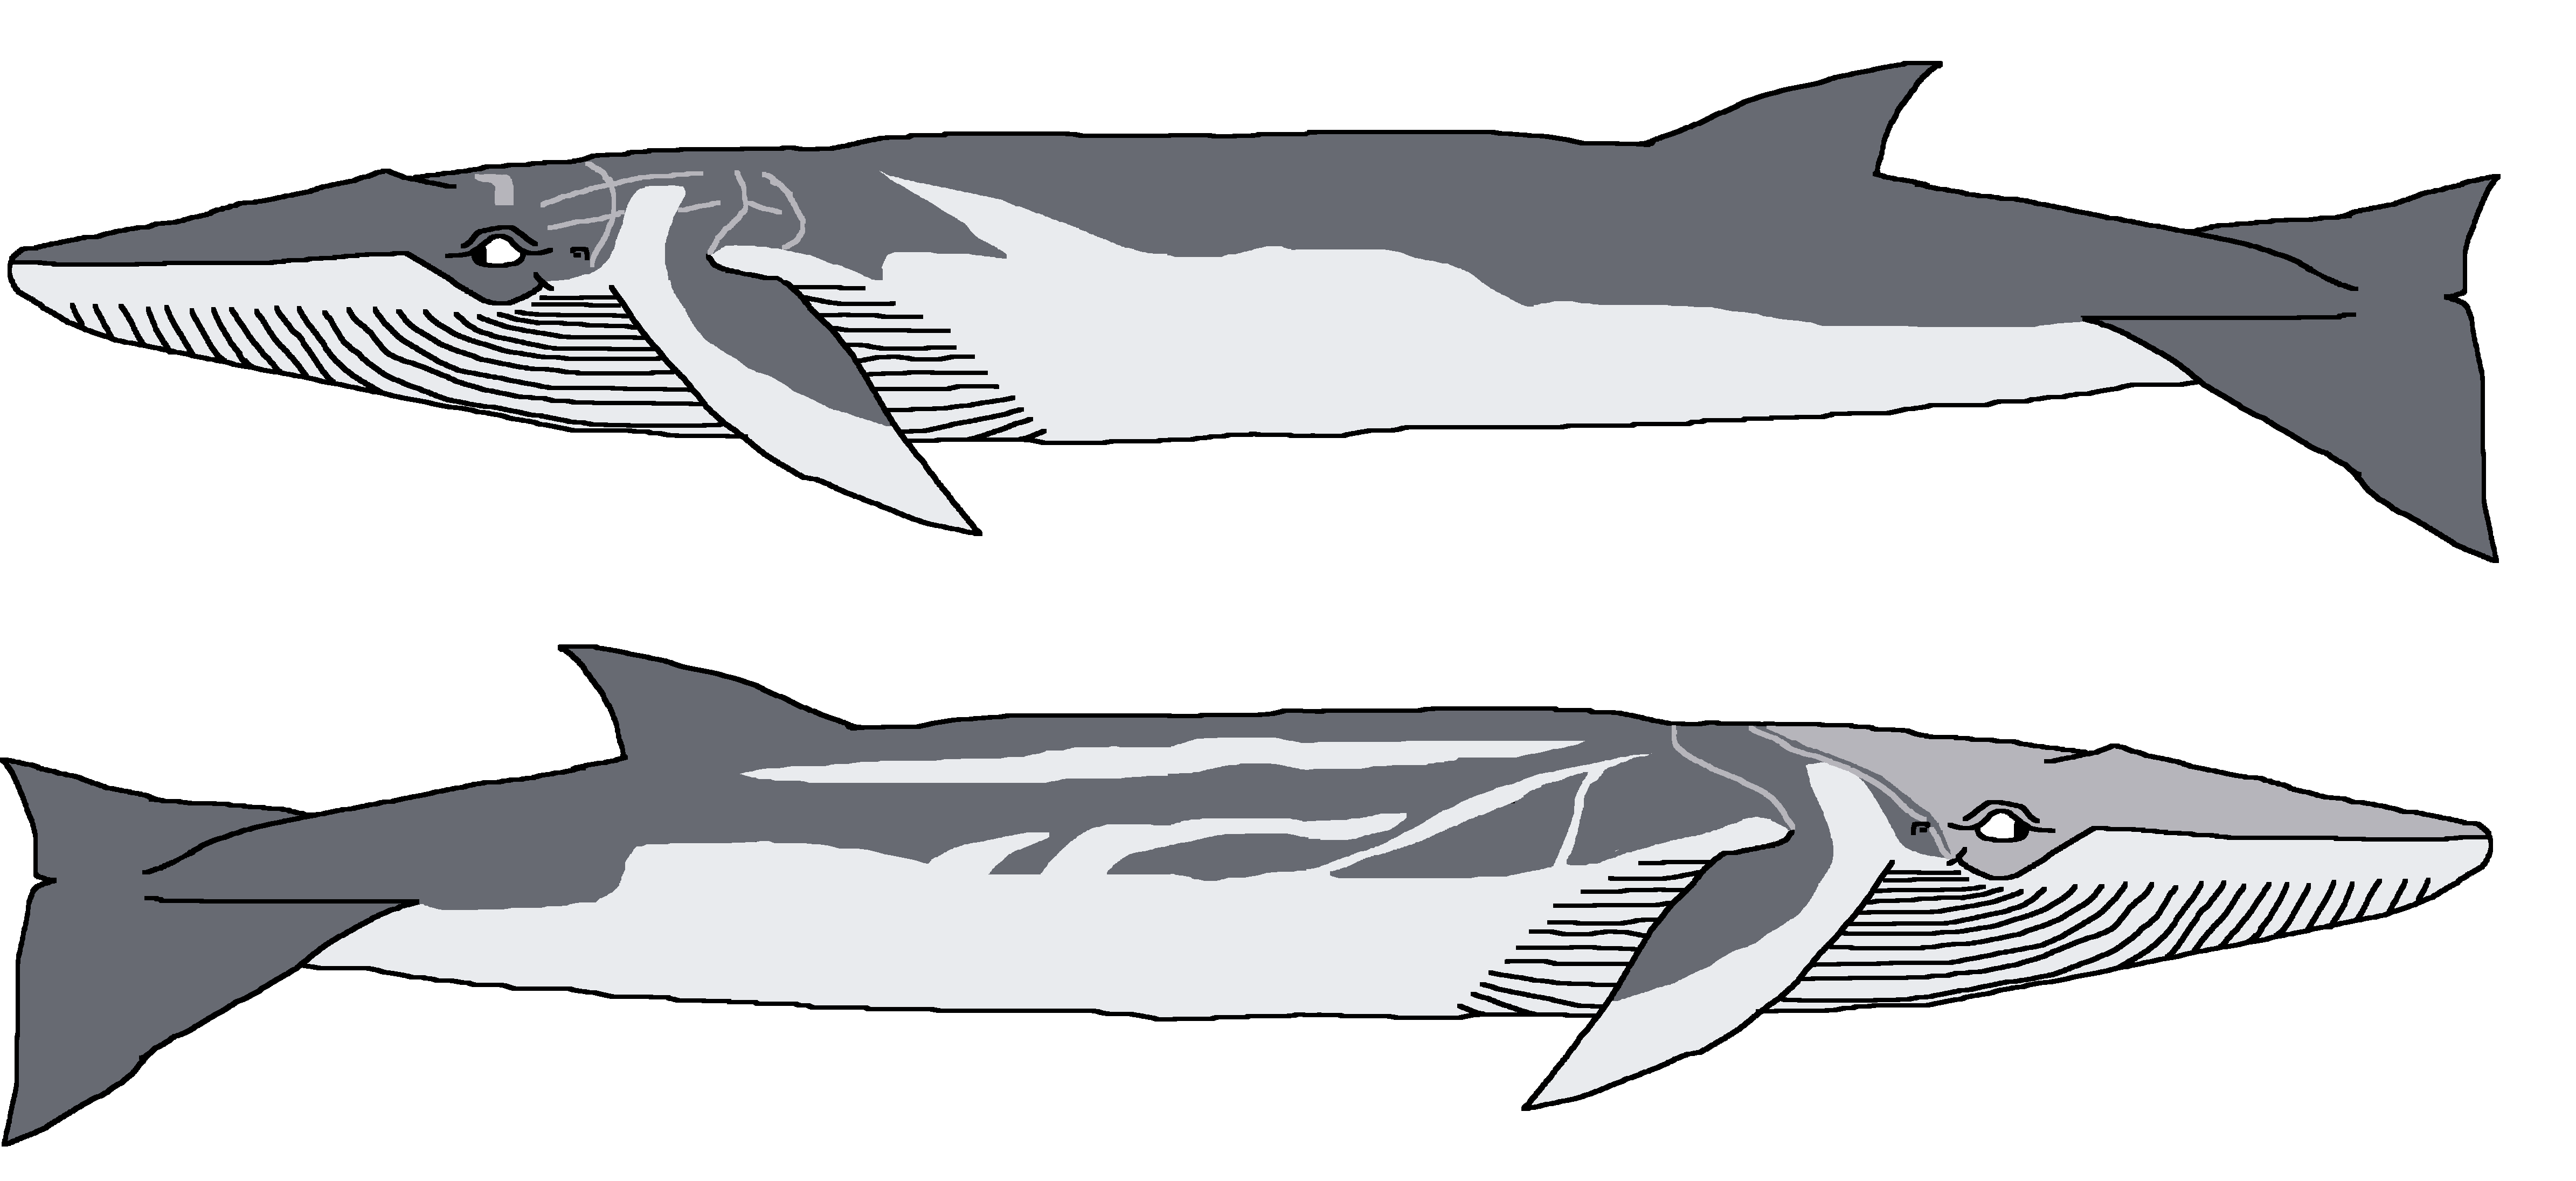 Southern Fin Whale by ChristopherBland on DeviantArt